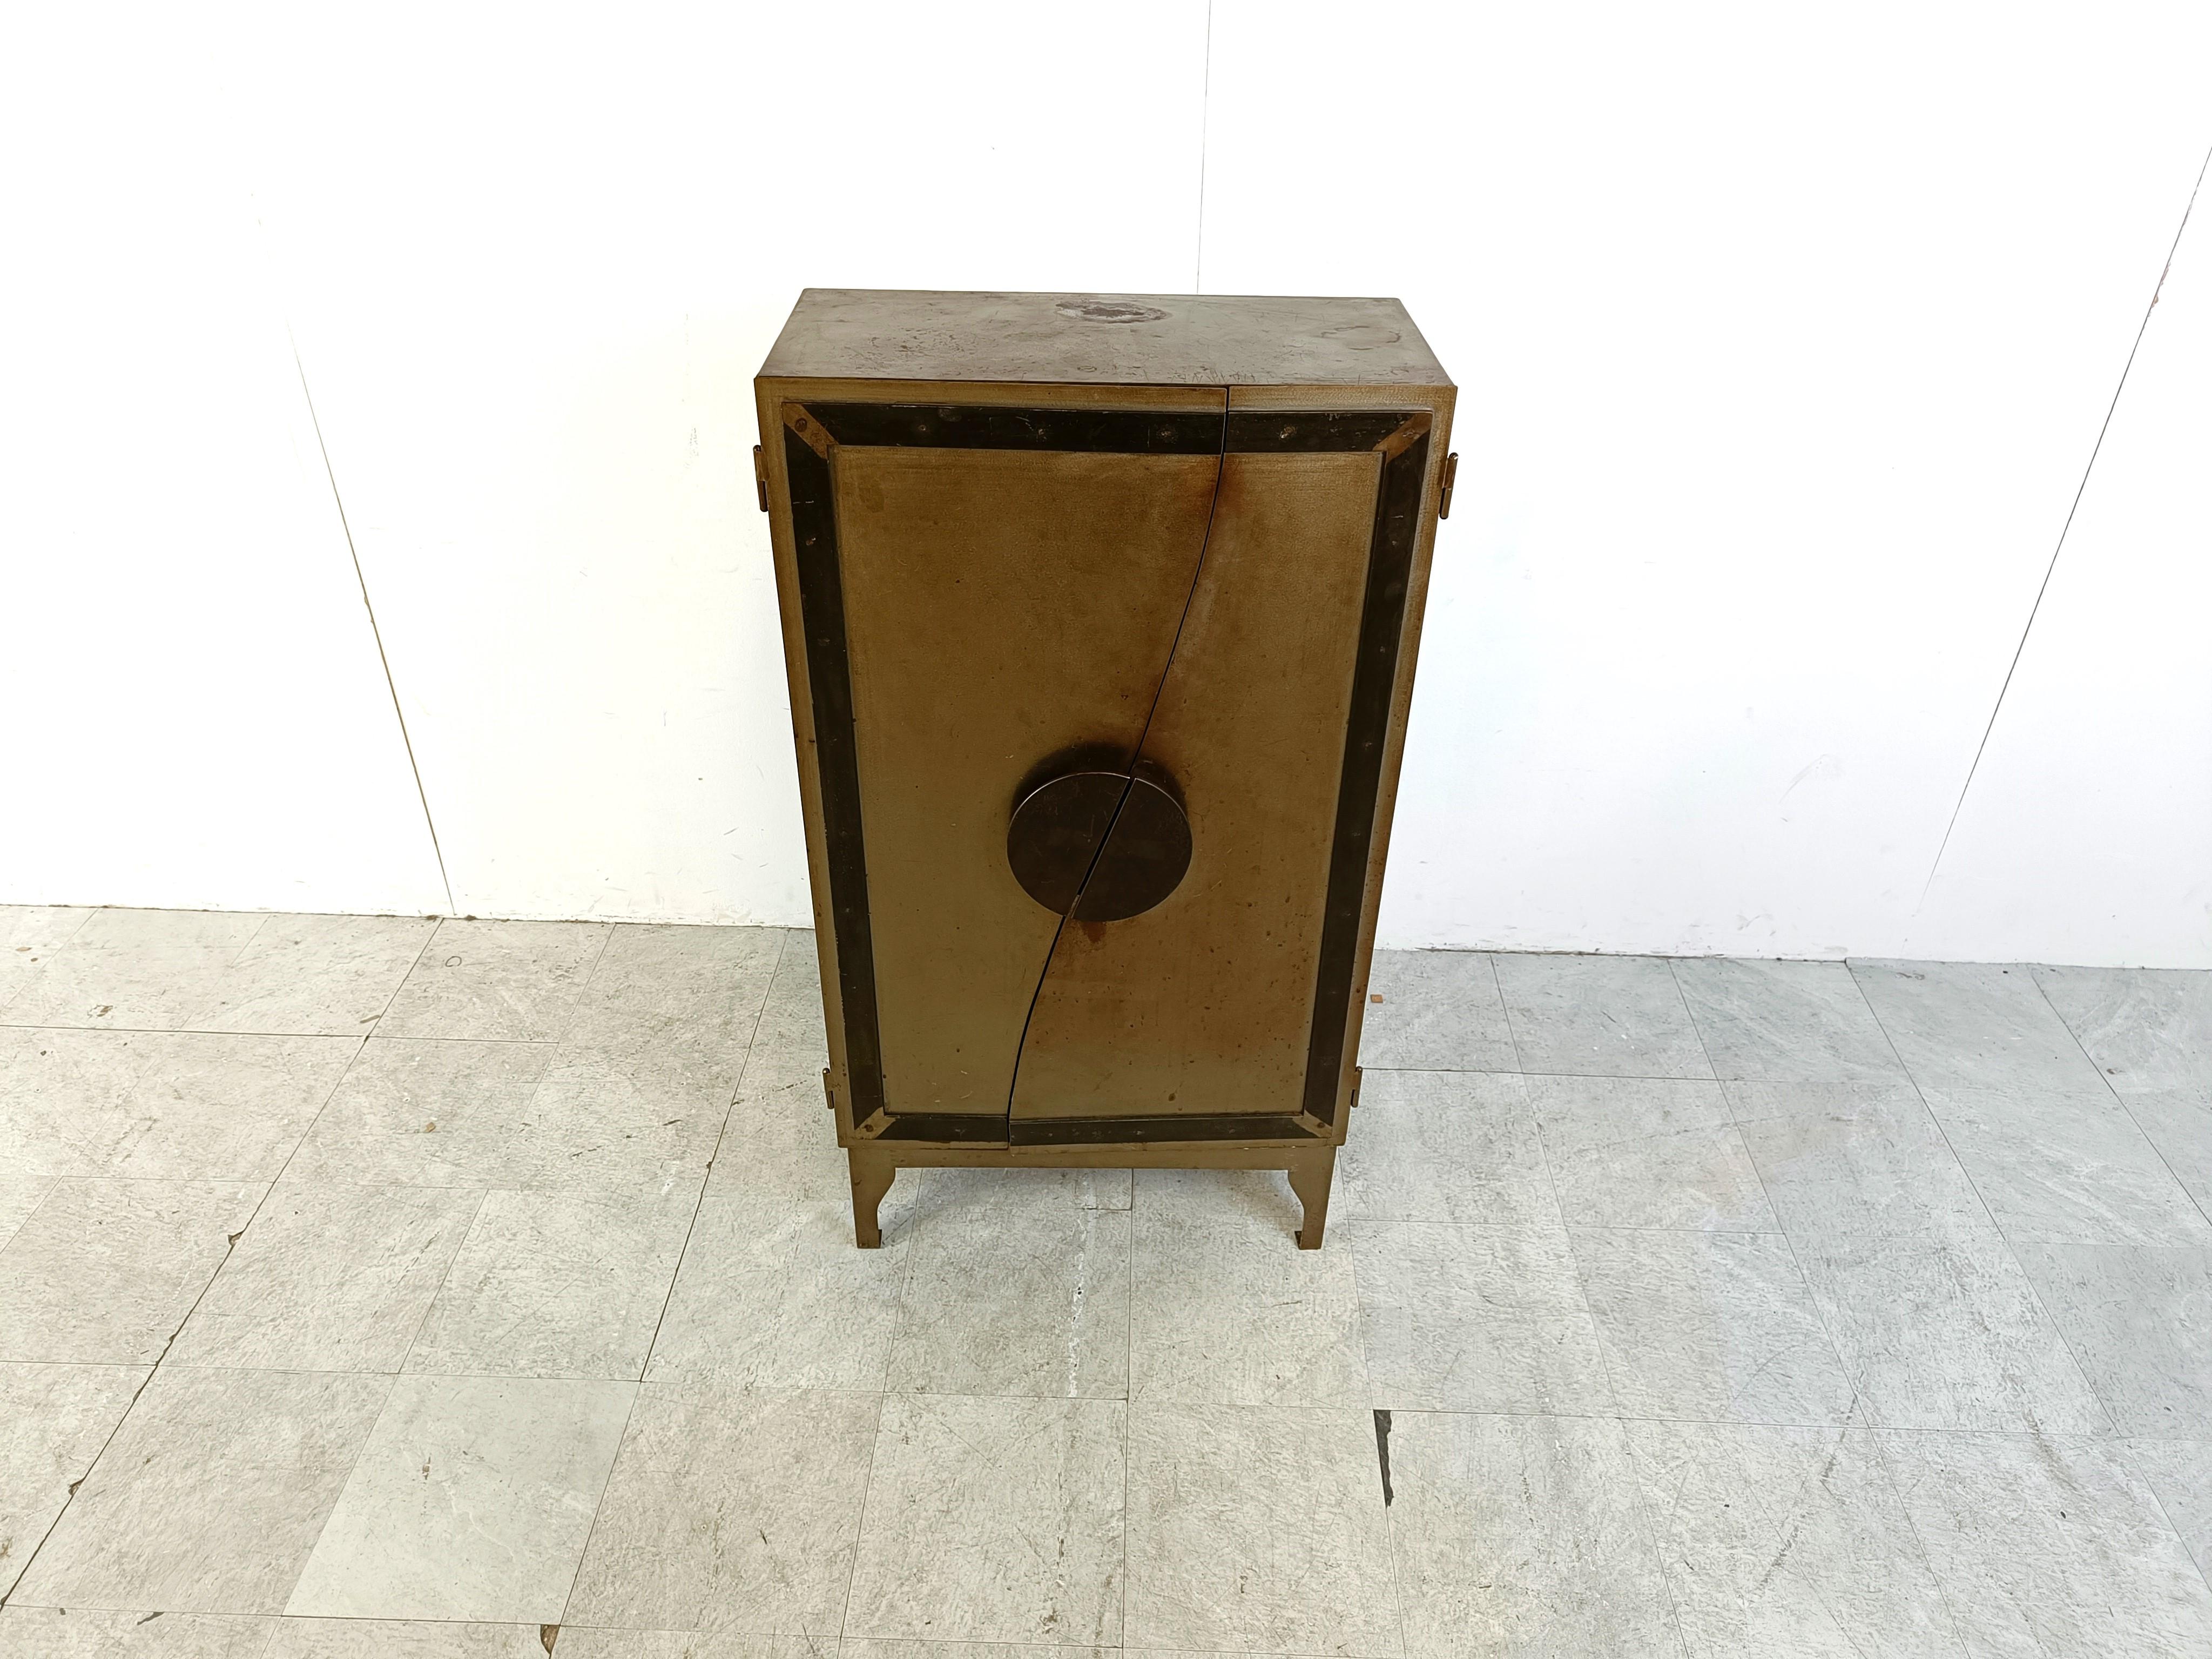 Vintage steel industrial cabinet with a touch of design.

This beautifully weathered and patinated cabinet has a mix of industrial and design.

Beautiful cut metal doors with designed handles revela a three shelf storage space.

This cabinet has